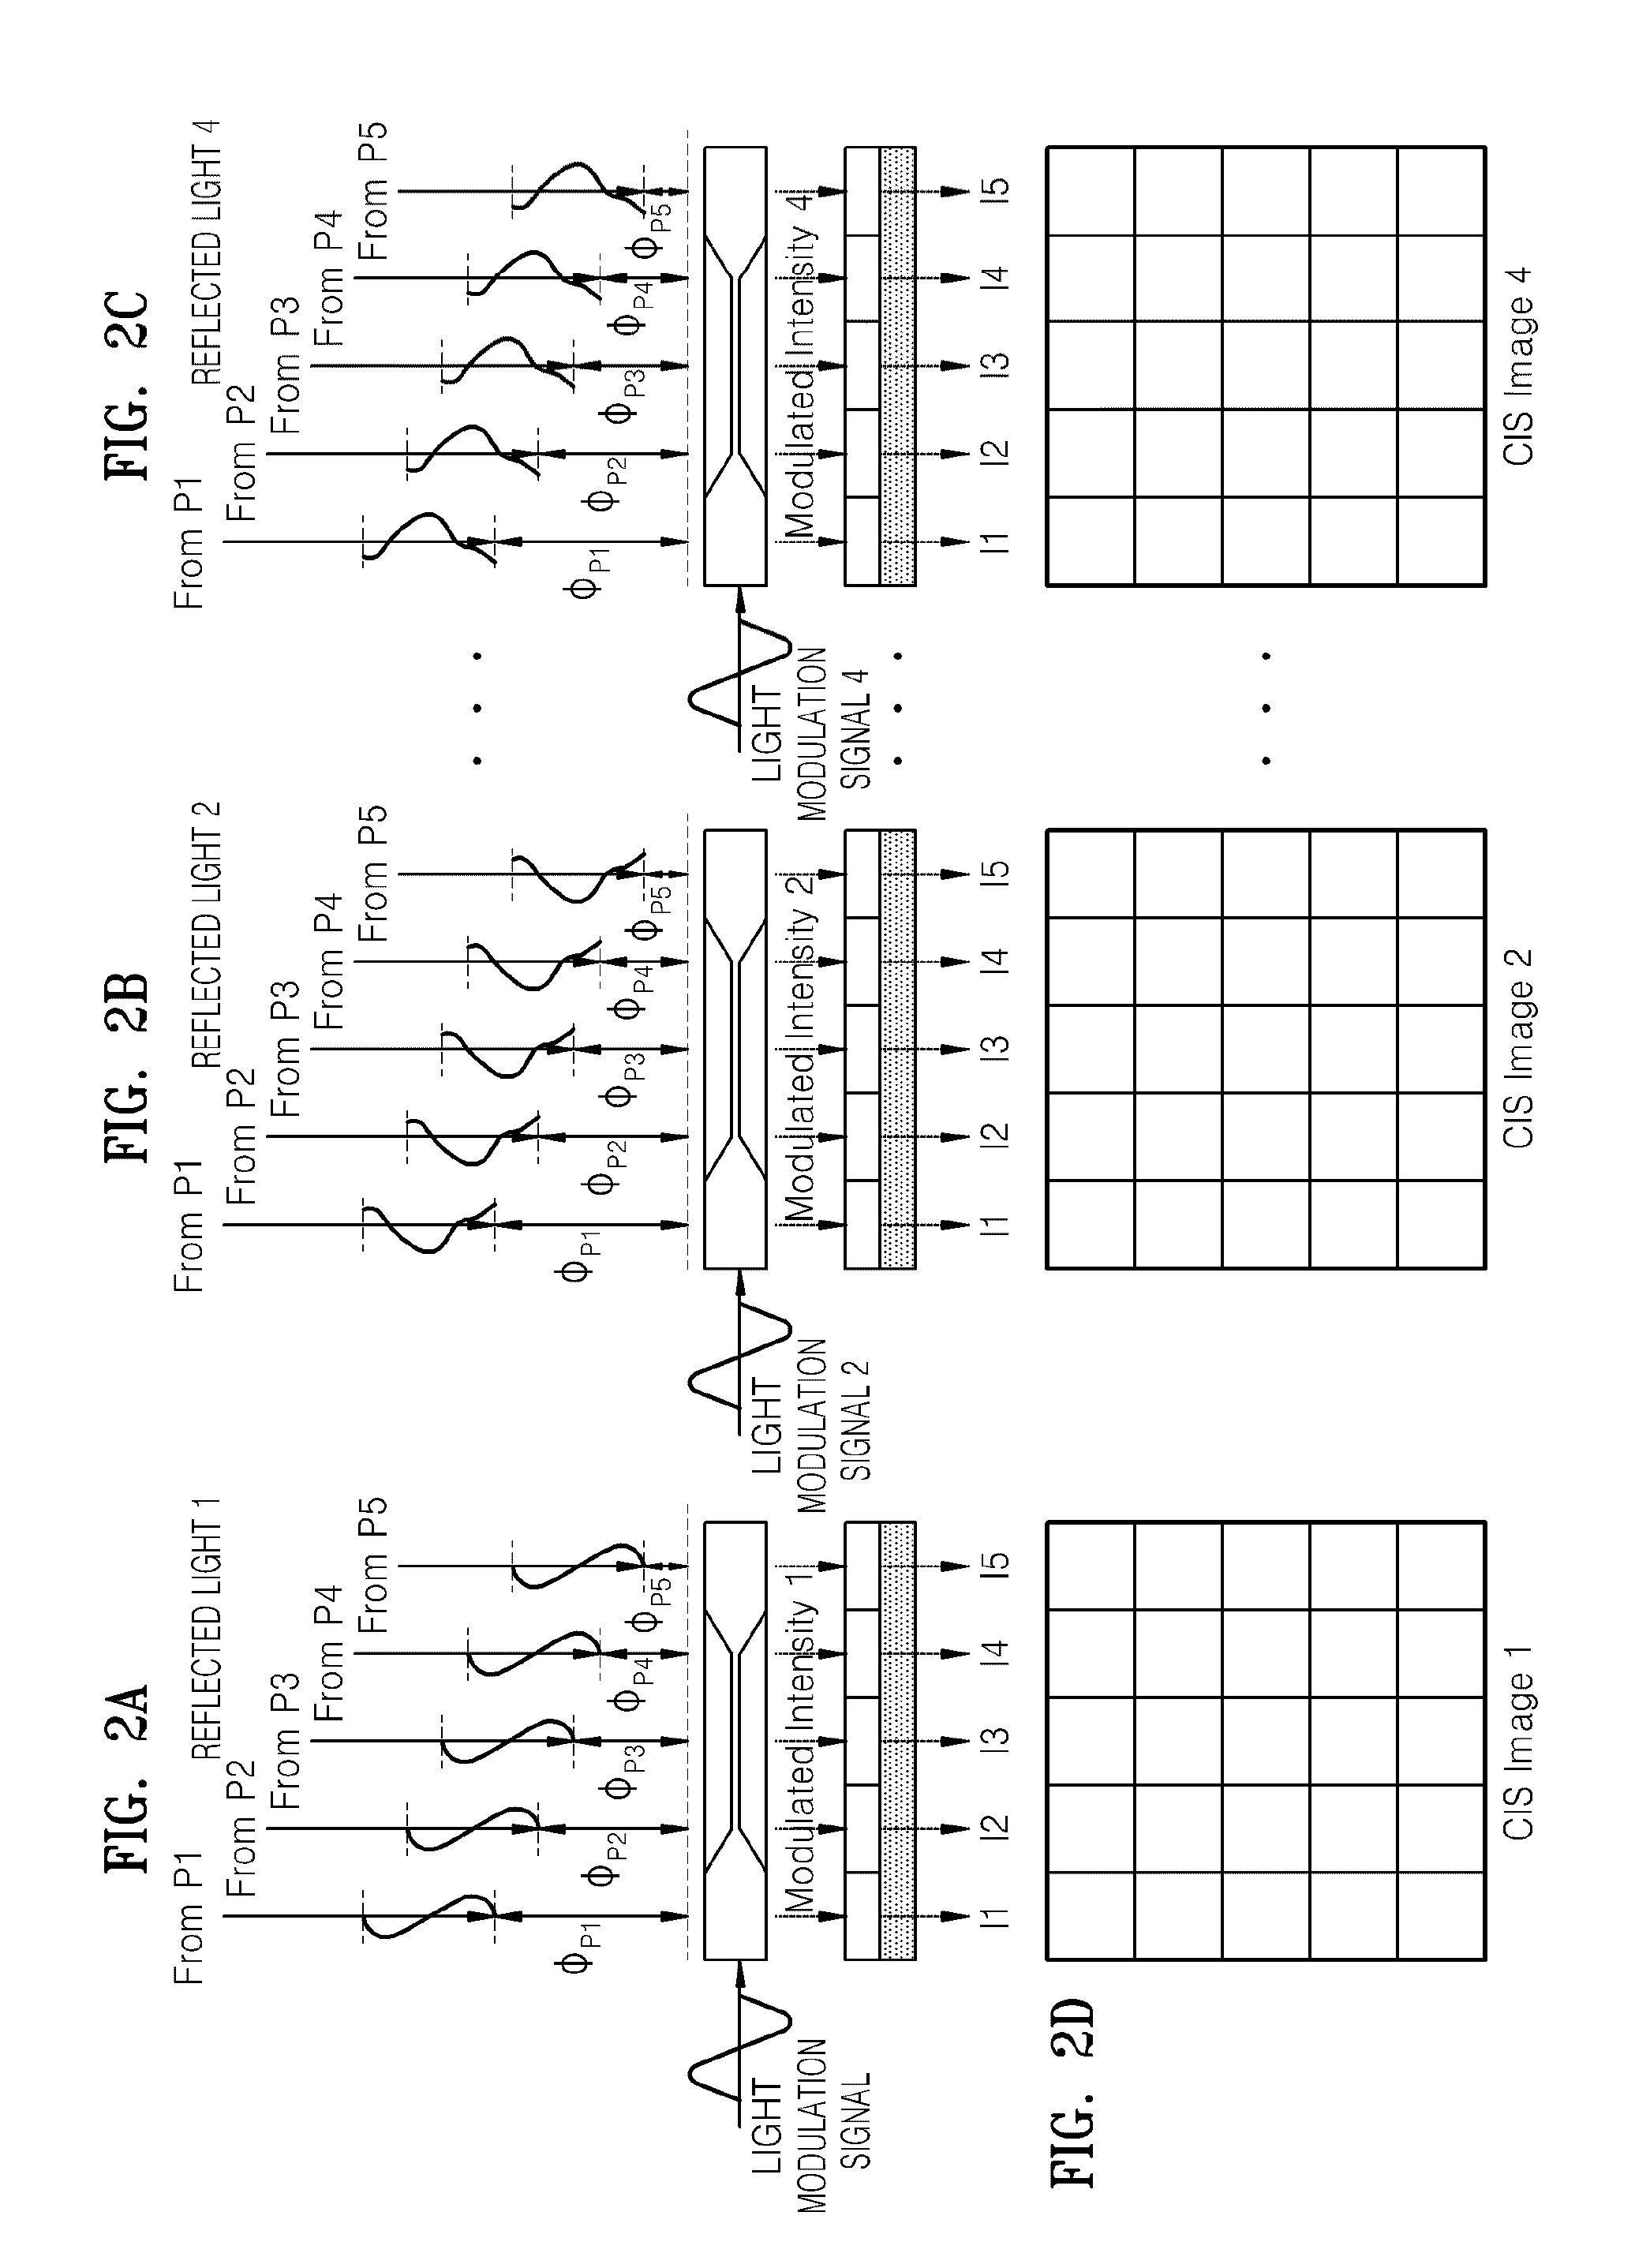 3D image acquisition apparatus and method of generating depth image in the 3D image acquisition apparatus